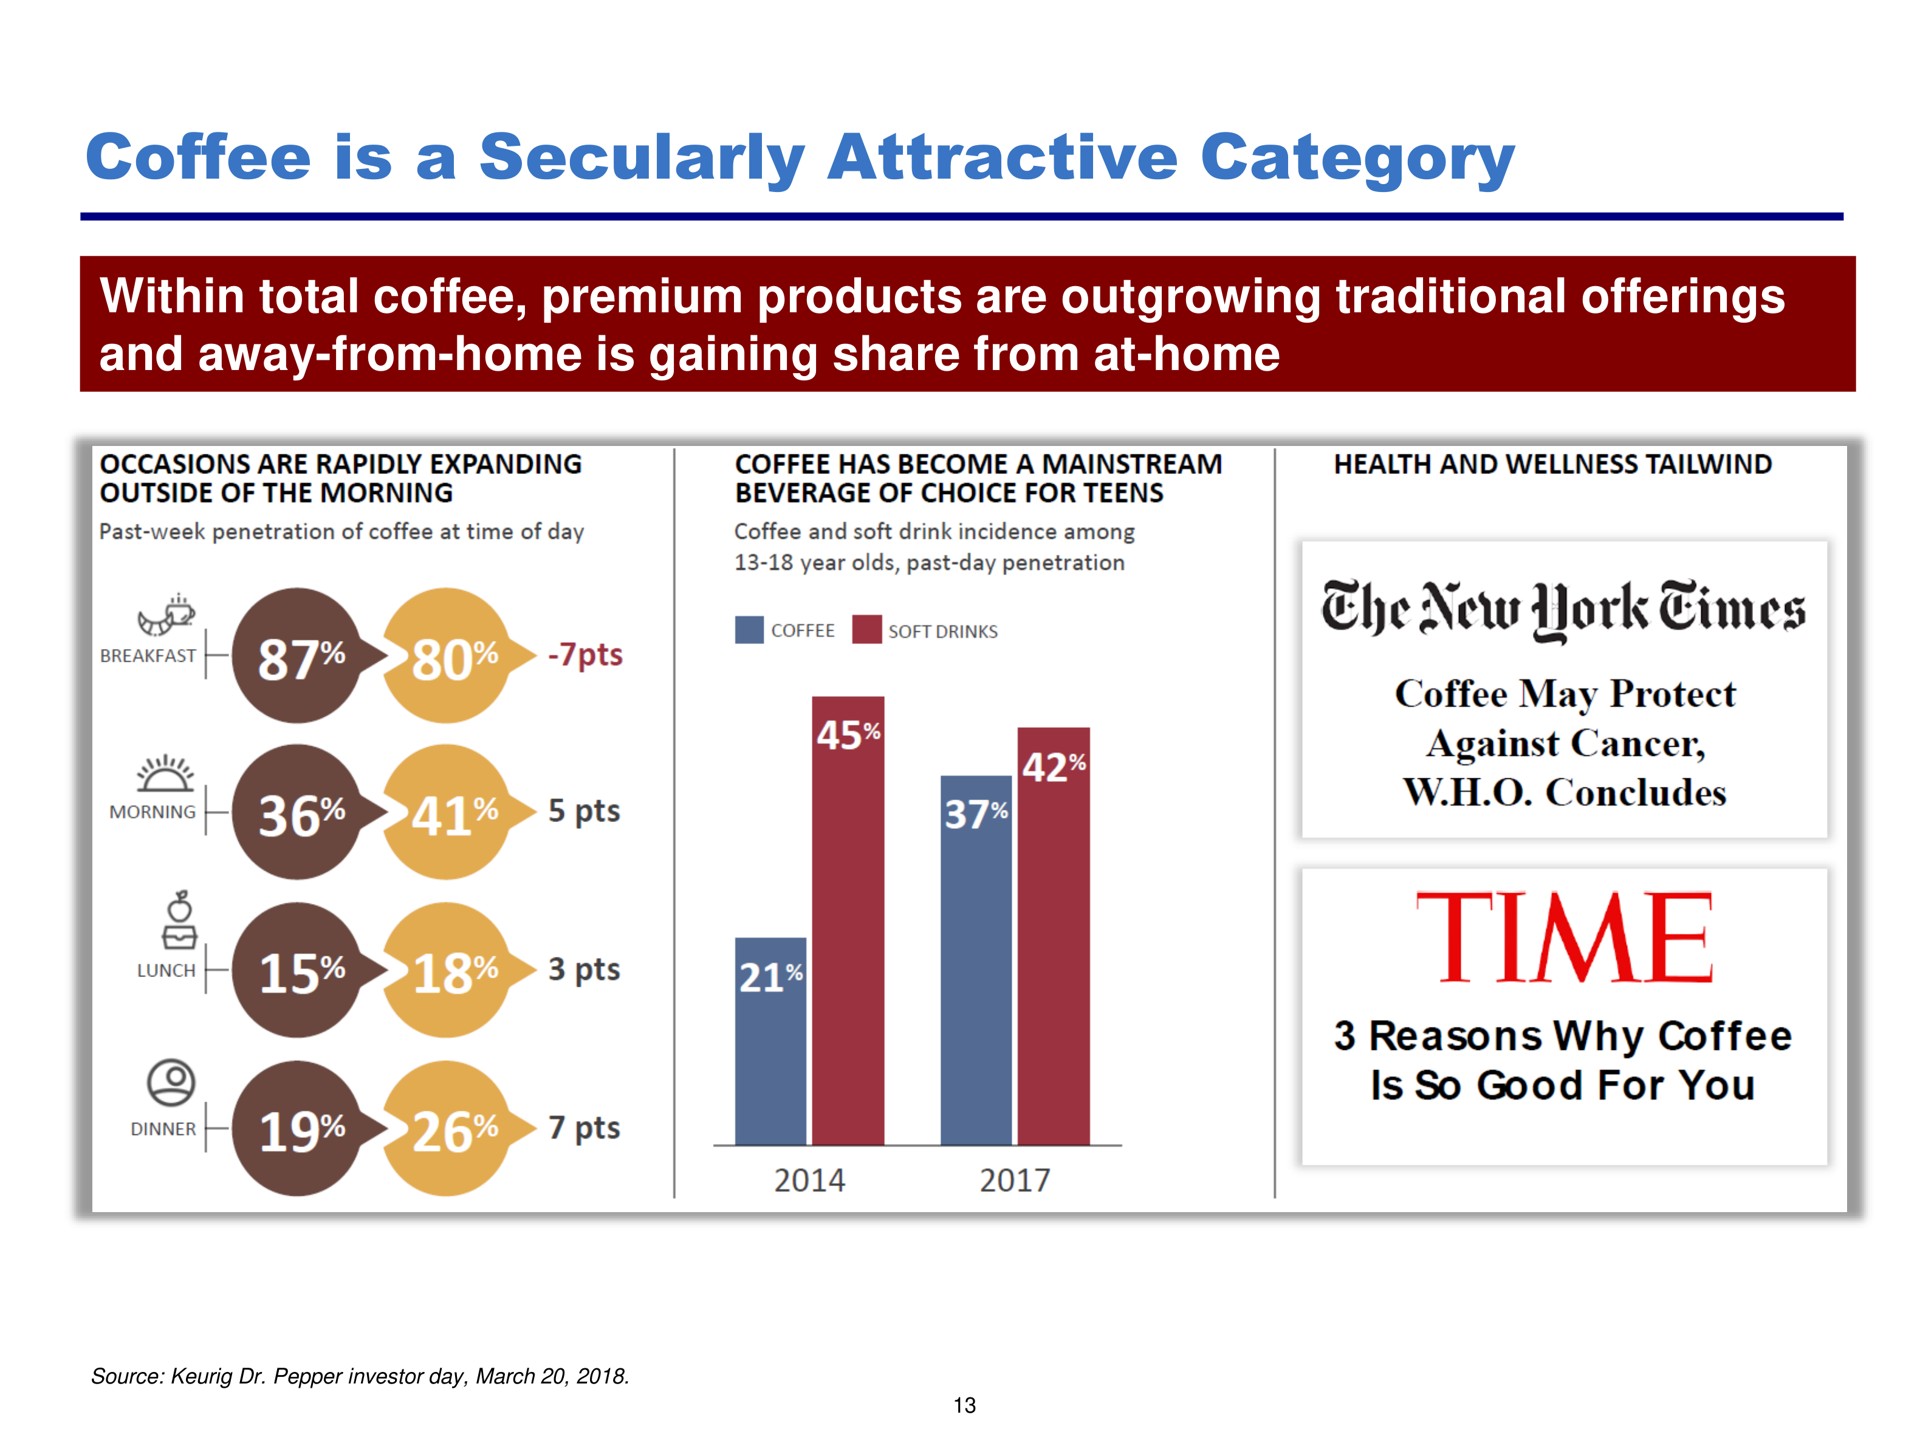 coffee is a secularly attractive category concludes | Pershing Square